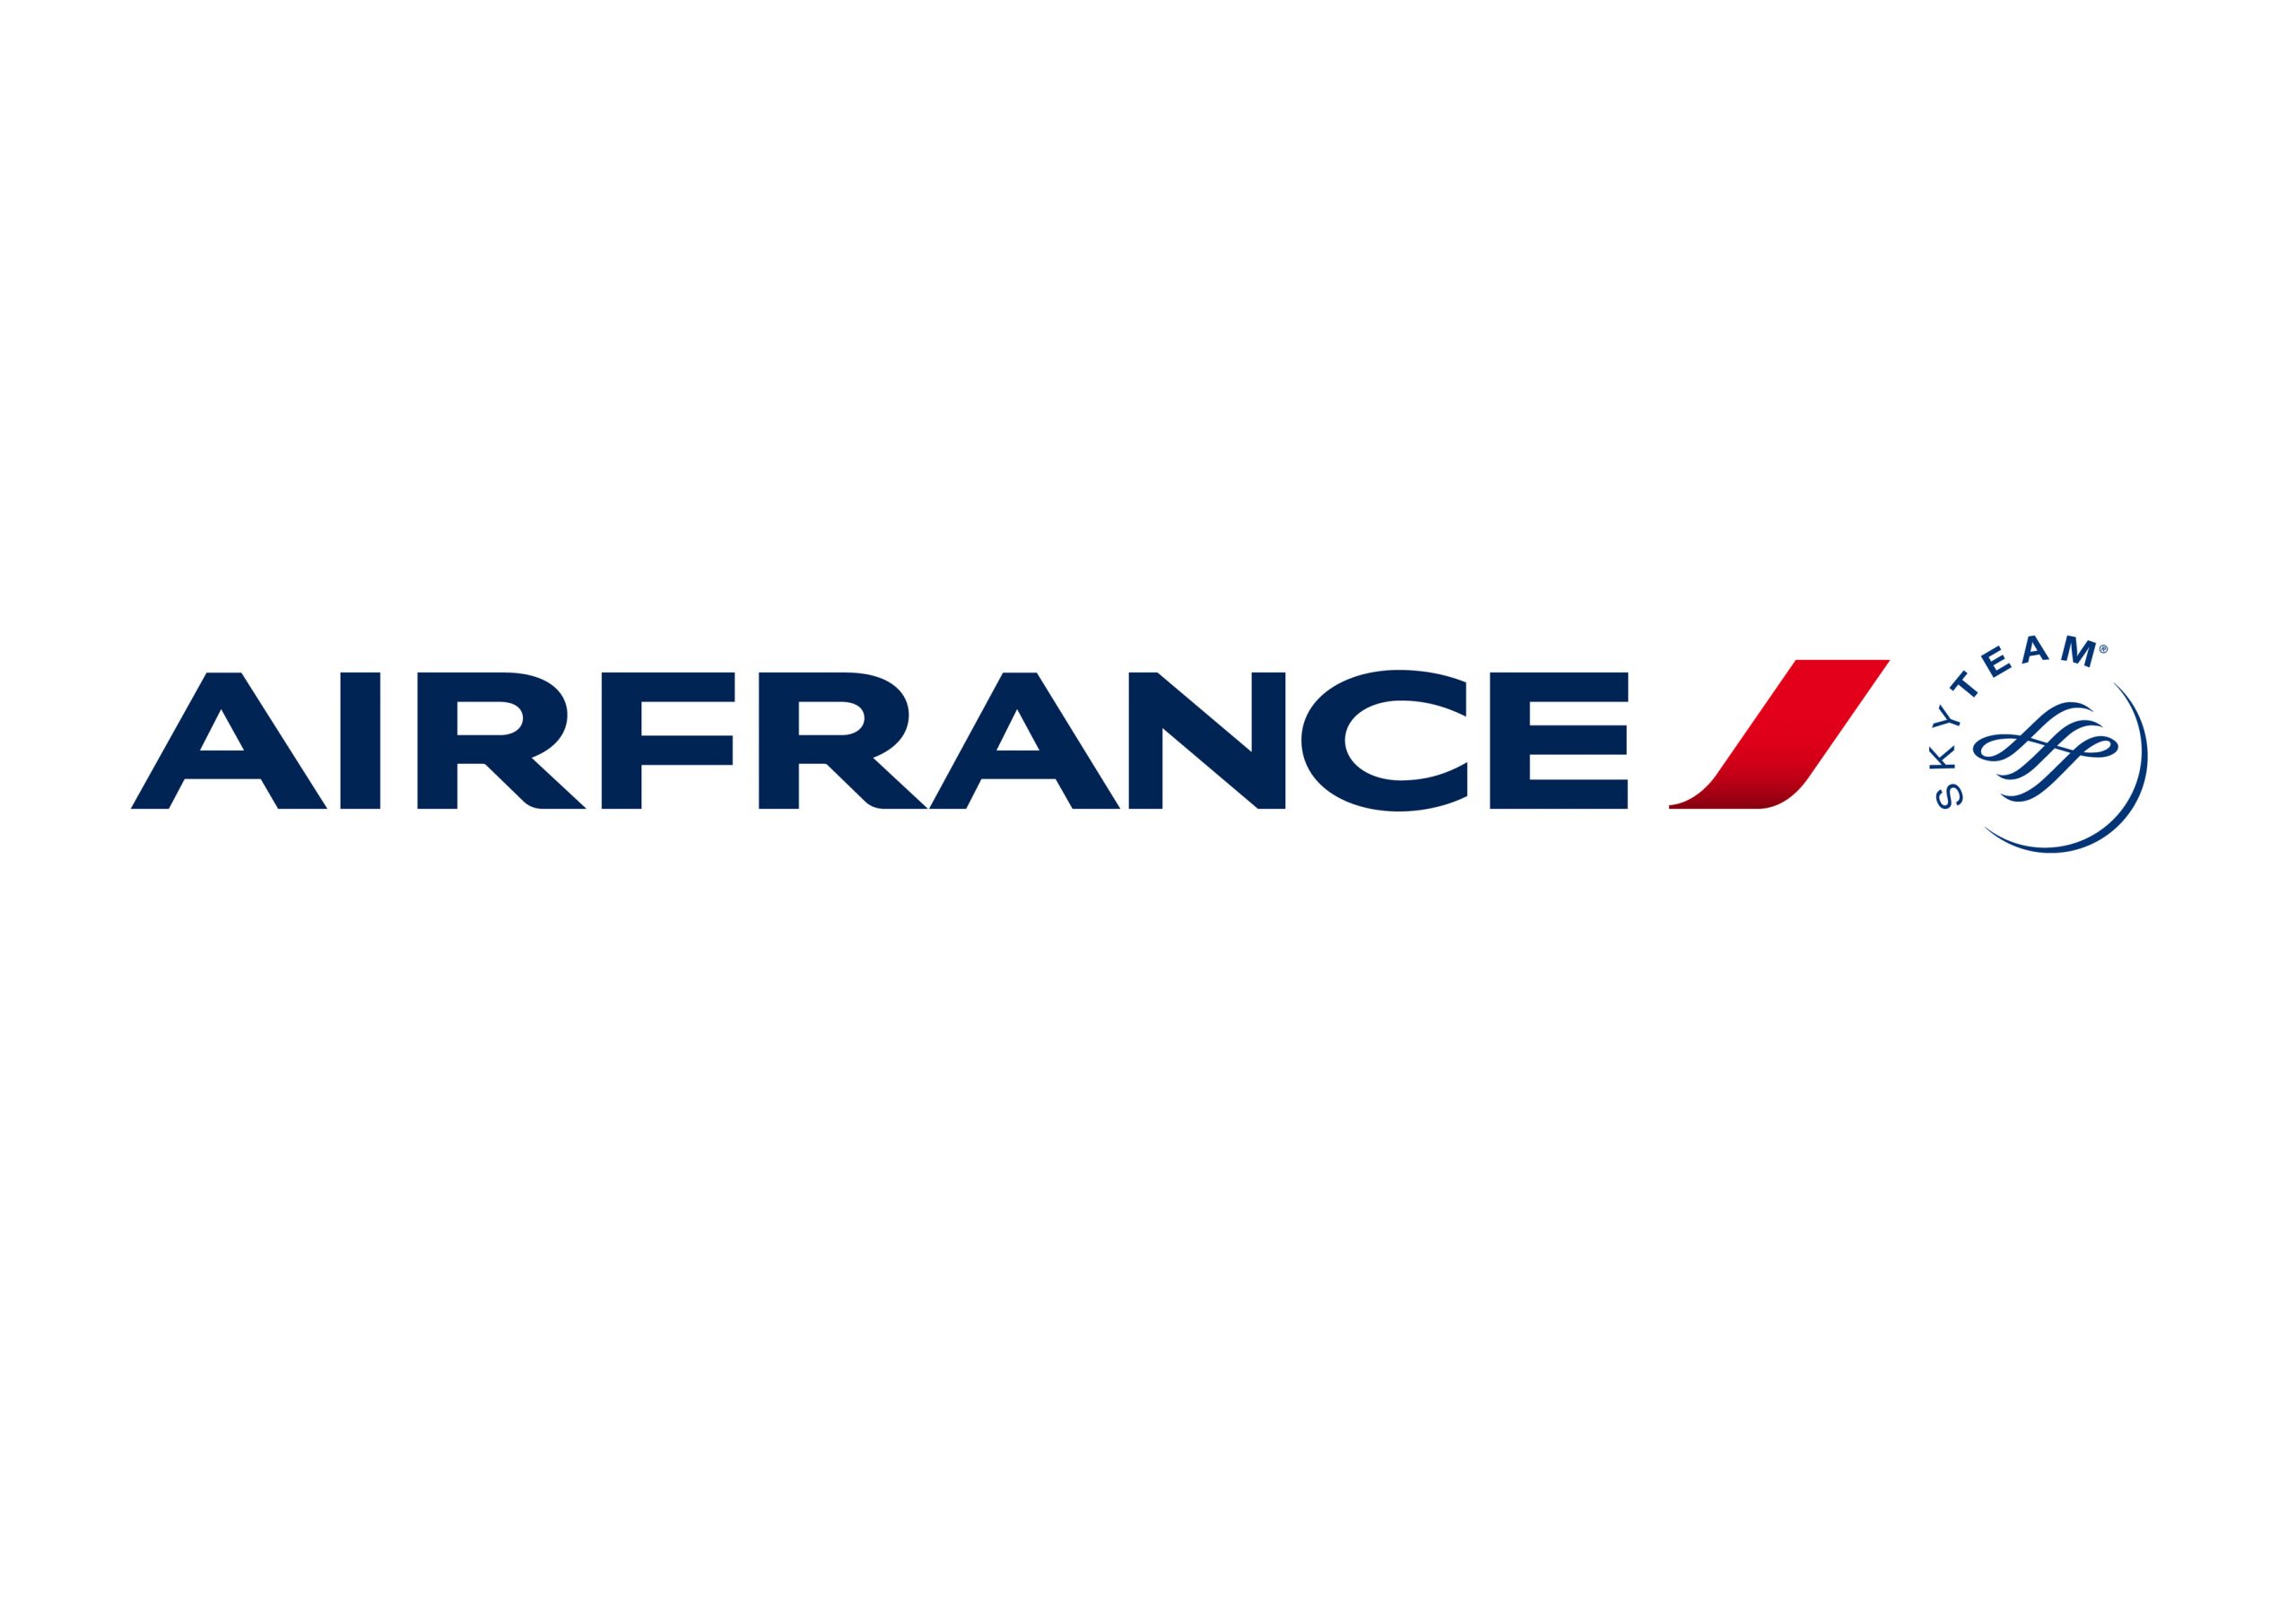 Air France will dismiss more than 7,5 thousand employees